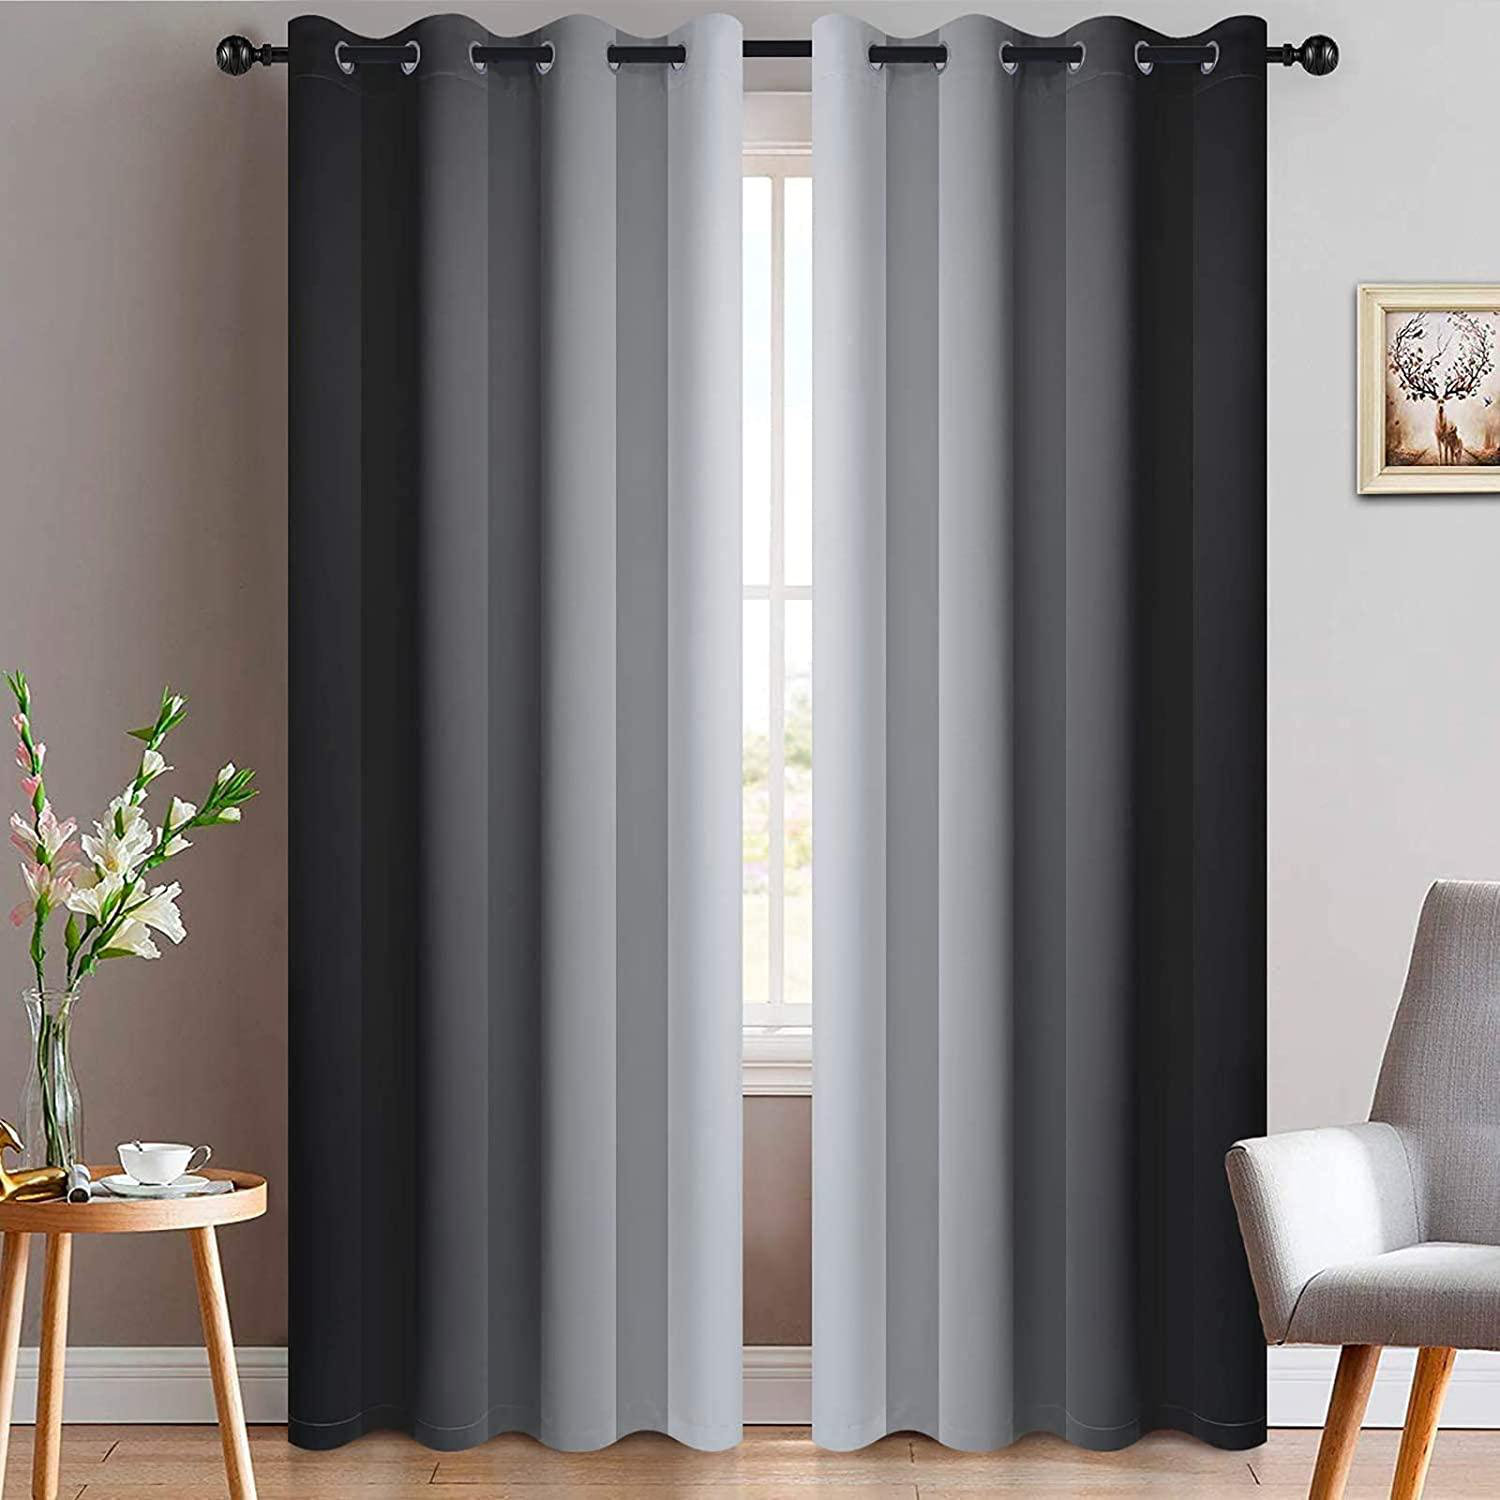 2 Panels Blackout Curtain Thermal Insulated Grommet Top Drapes for Bedroom 